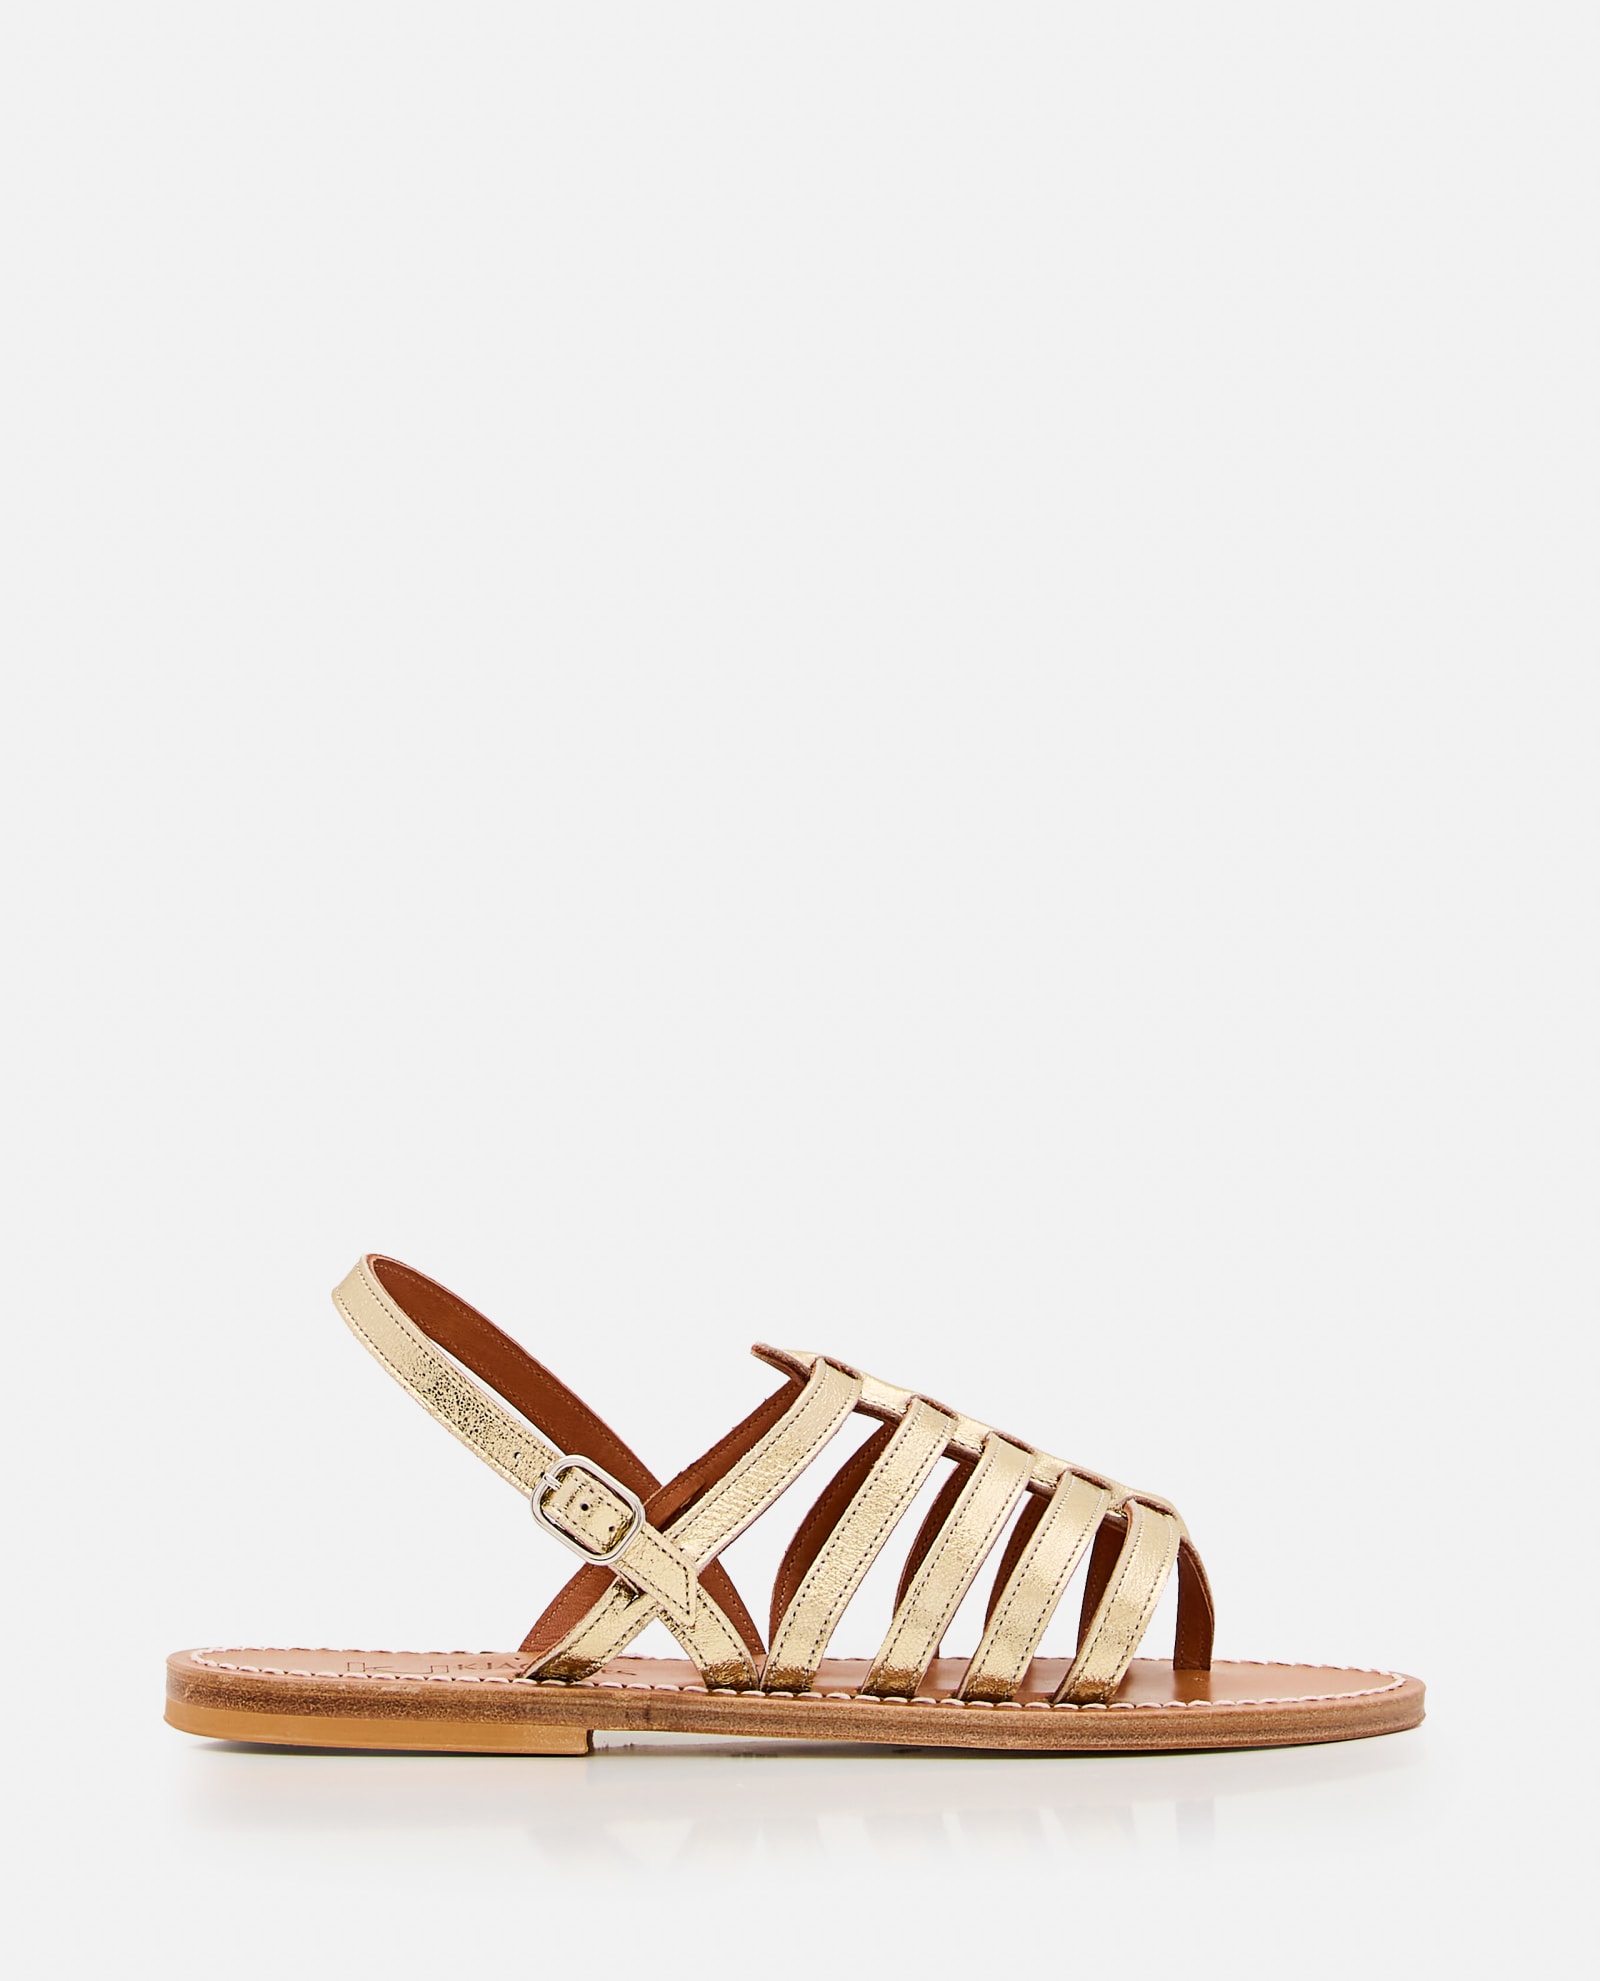 K.Jacques Homere Leather Sandals